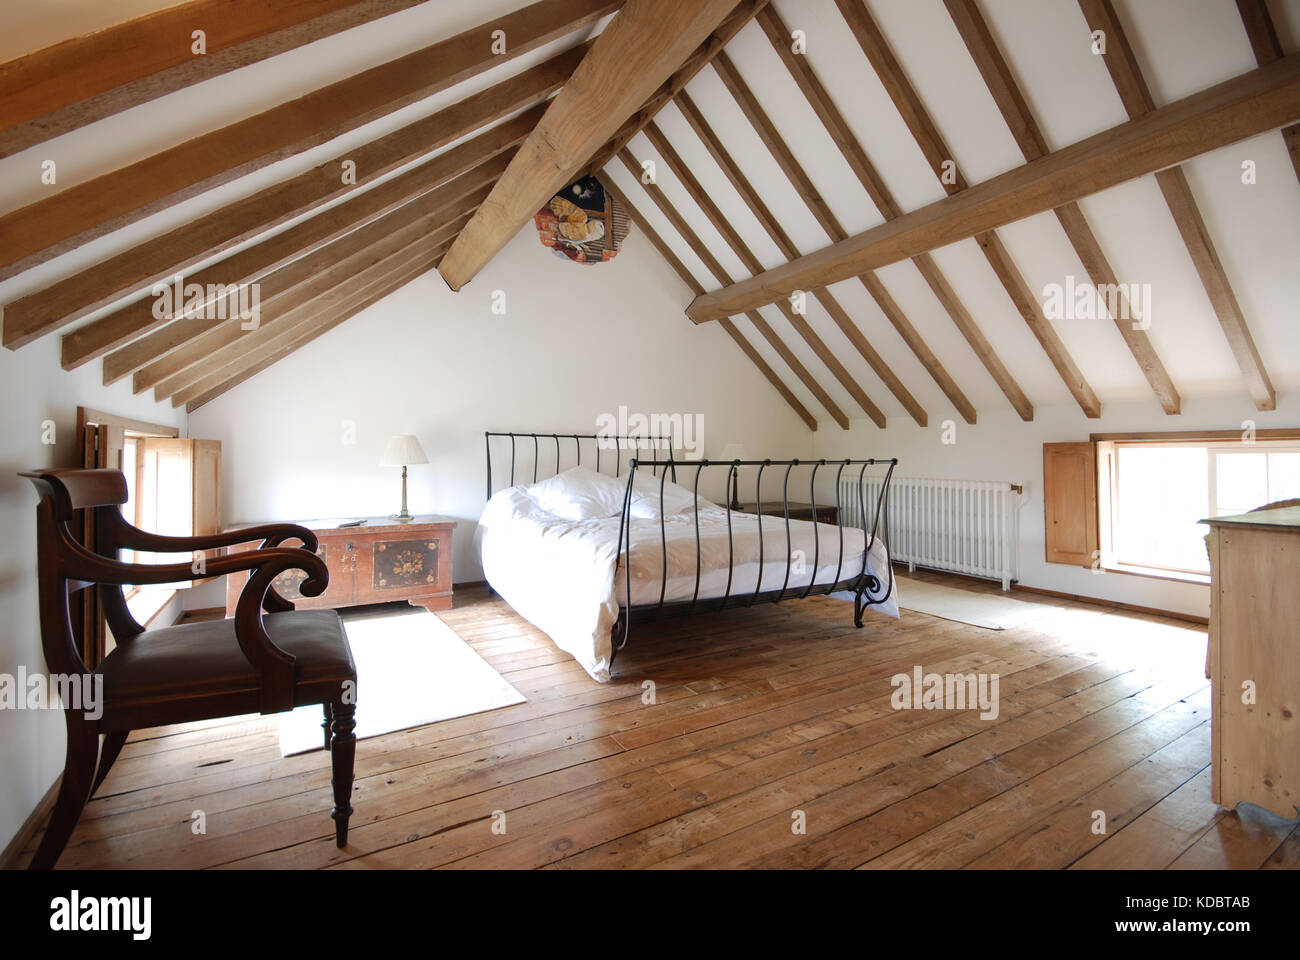 Exposed Wooden Ceiling Beams Stock Photos Exposed Wooden Ceiling